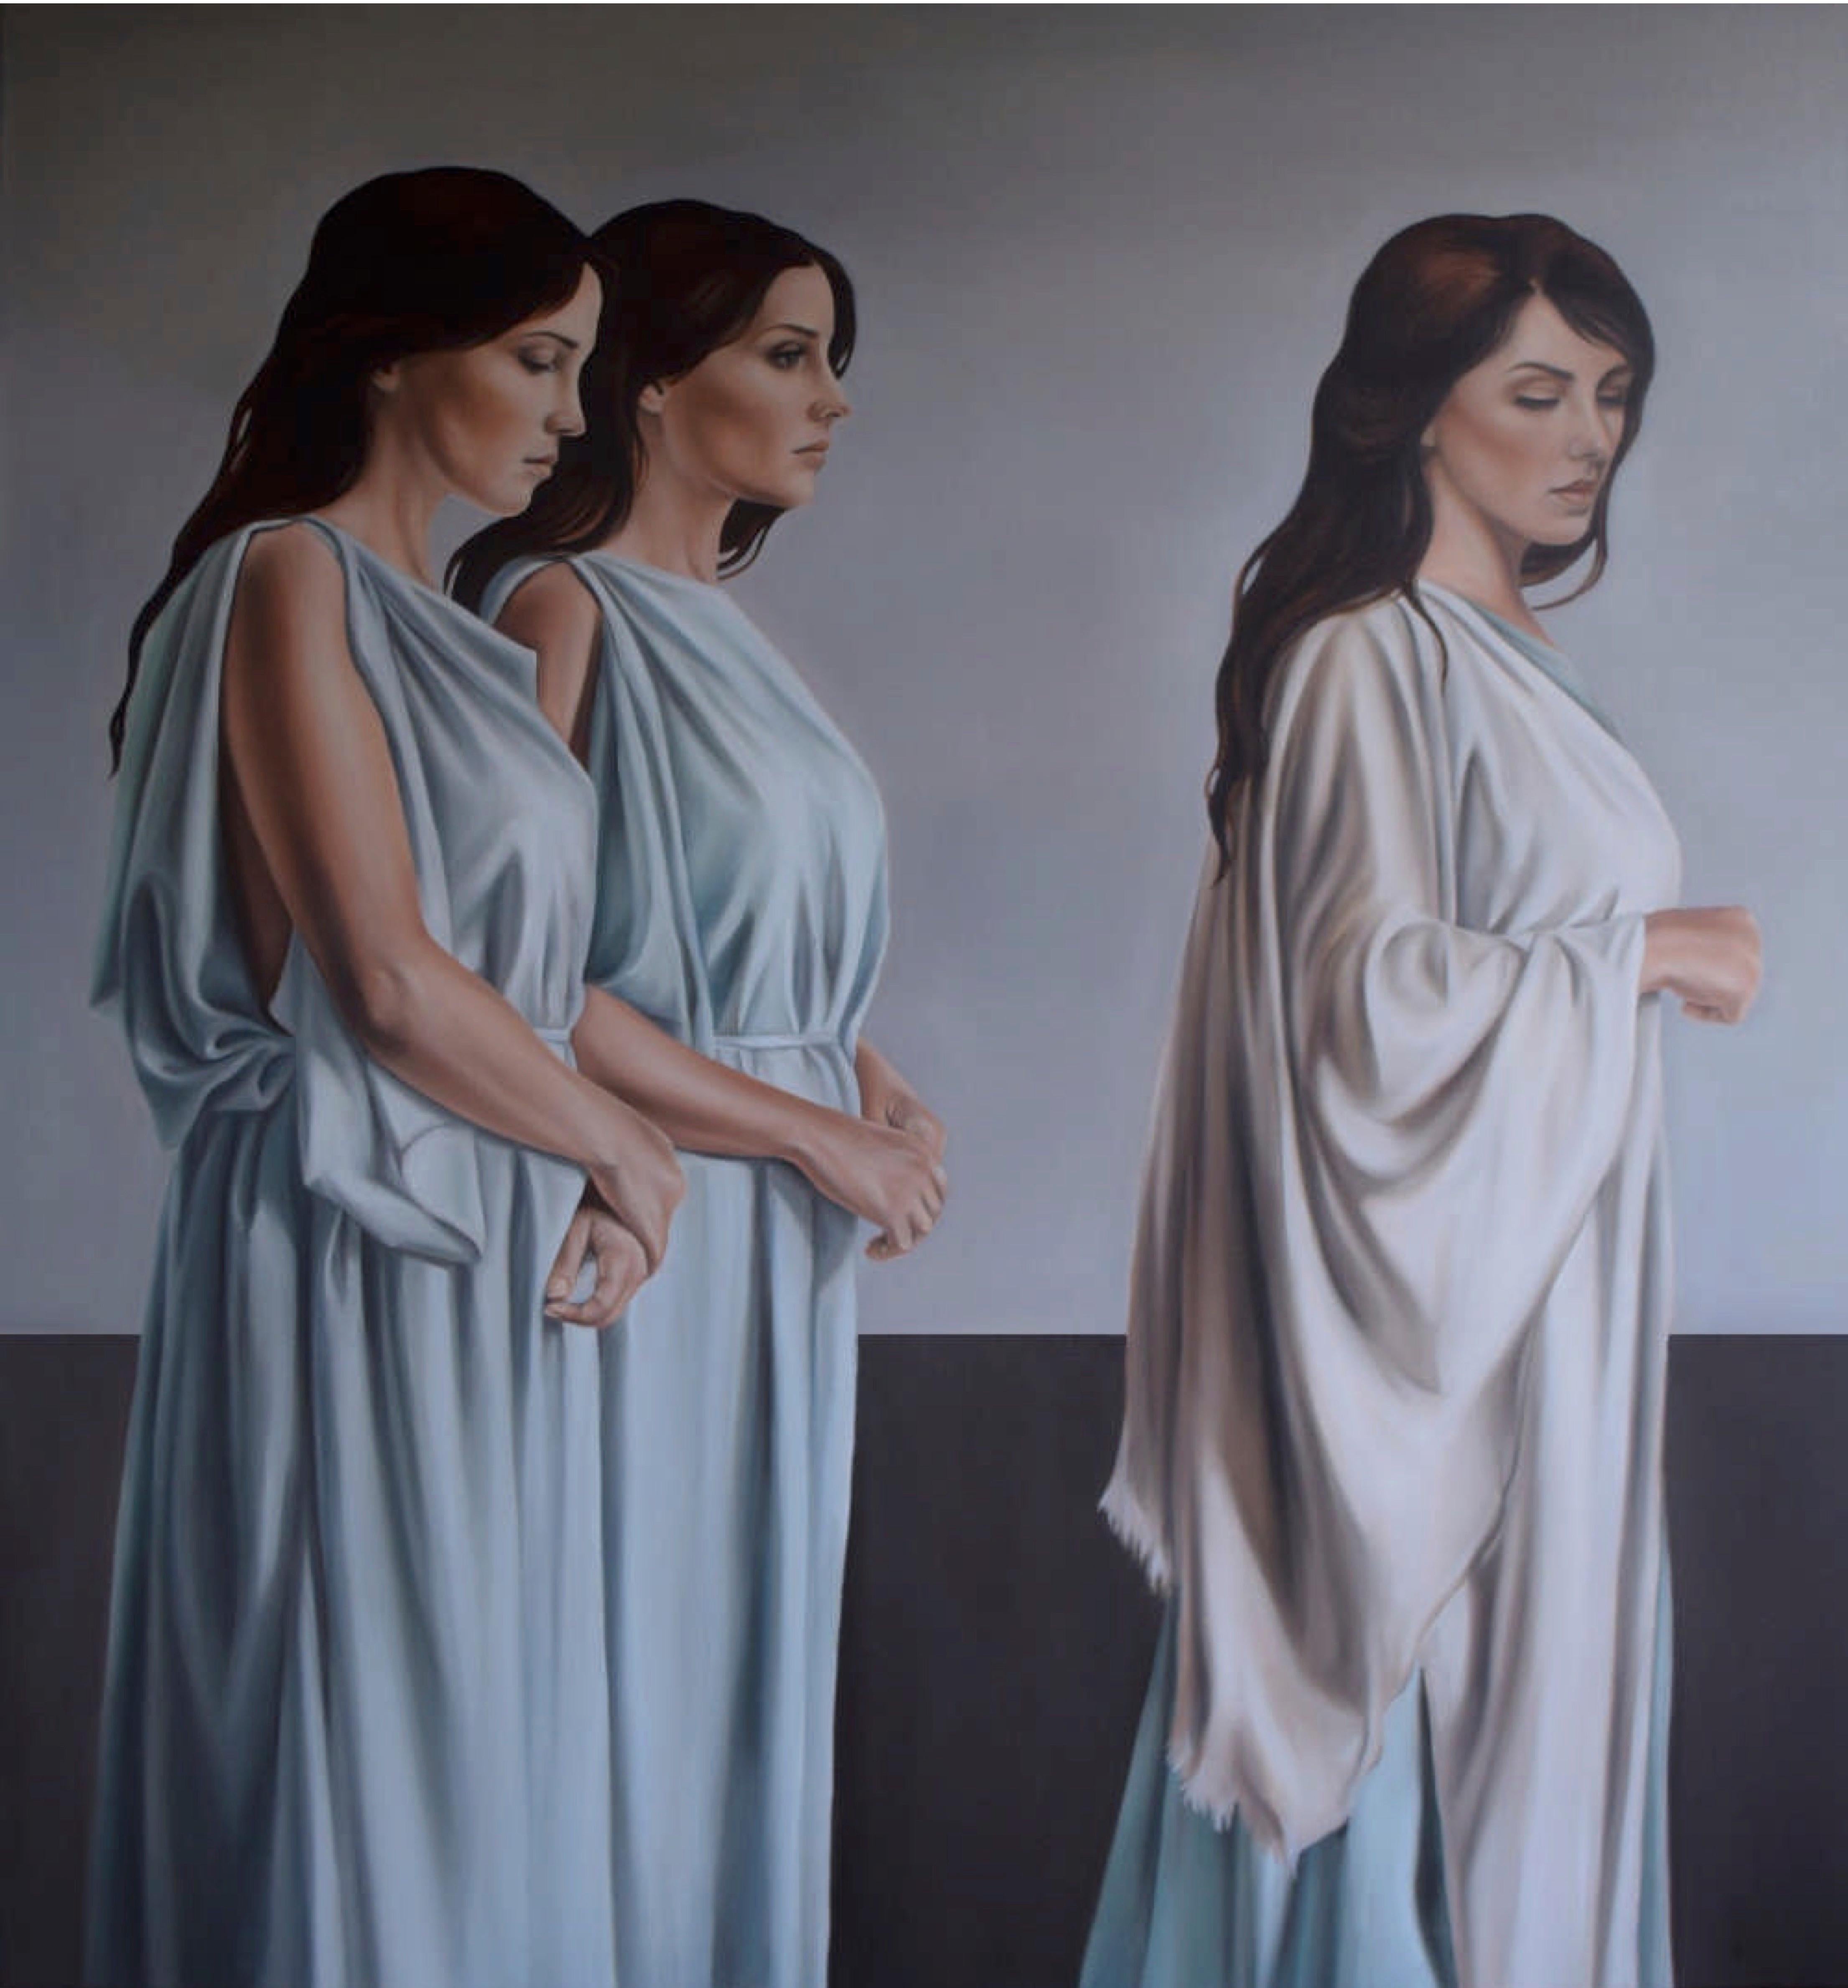 "Trace" Oil painting 43"x39"inch by Yousra Hafad					